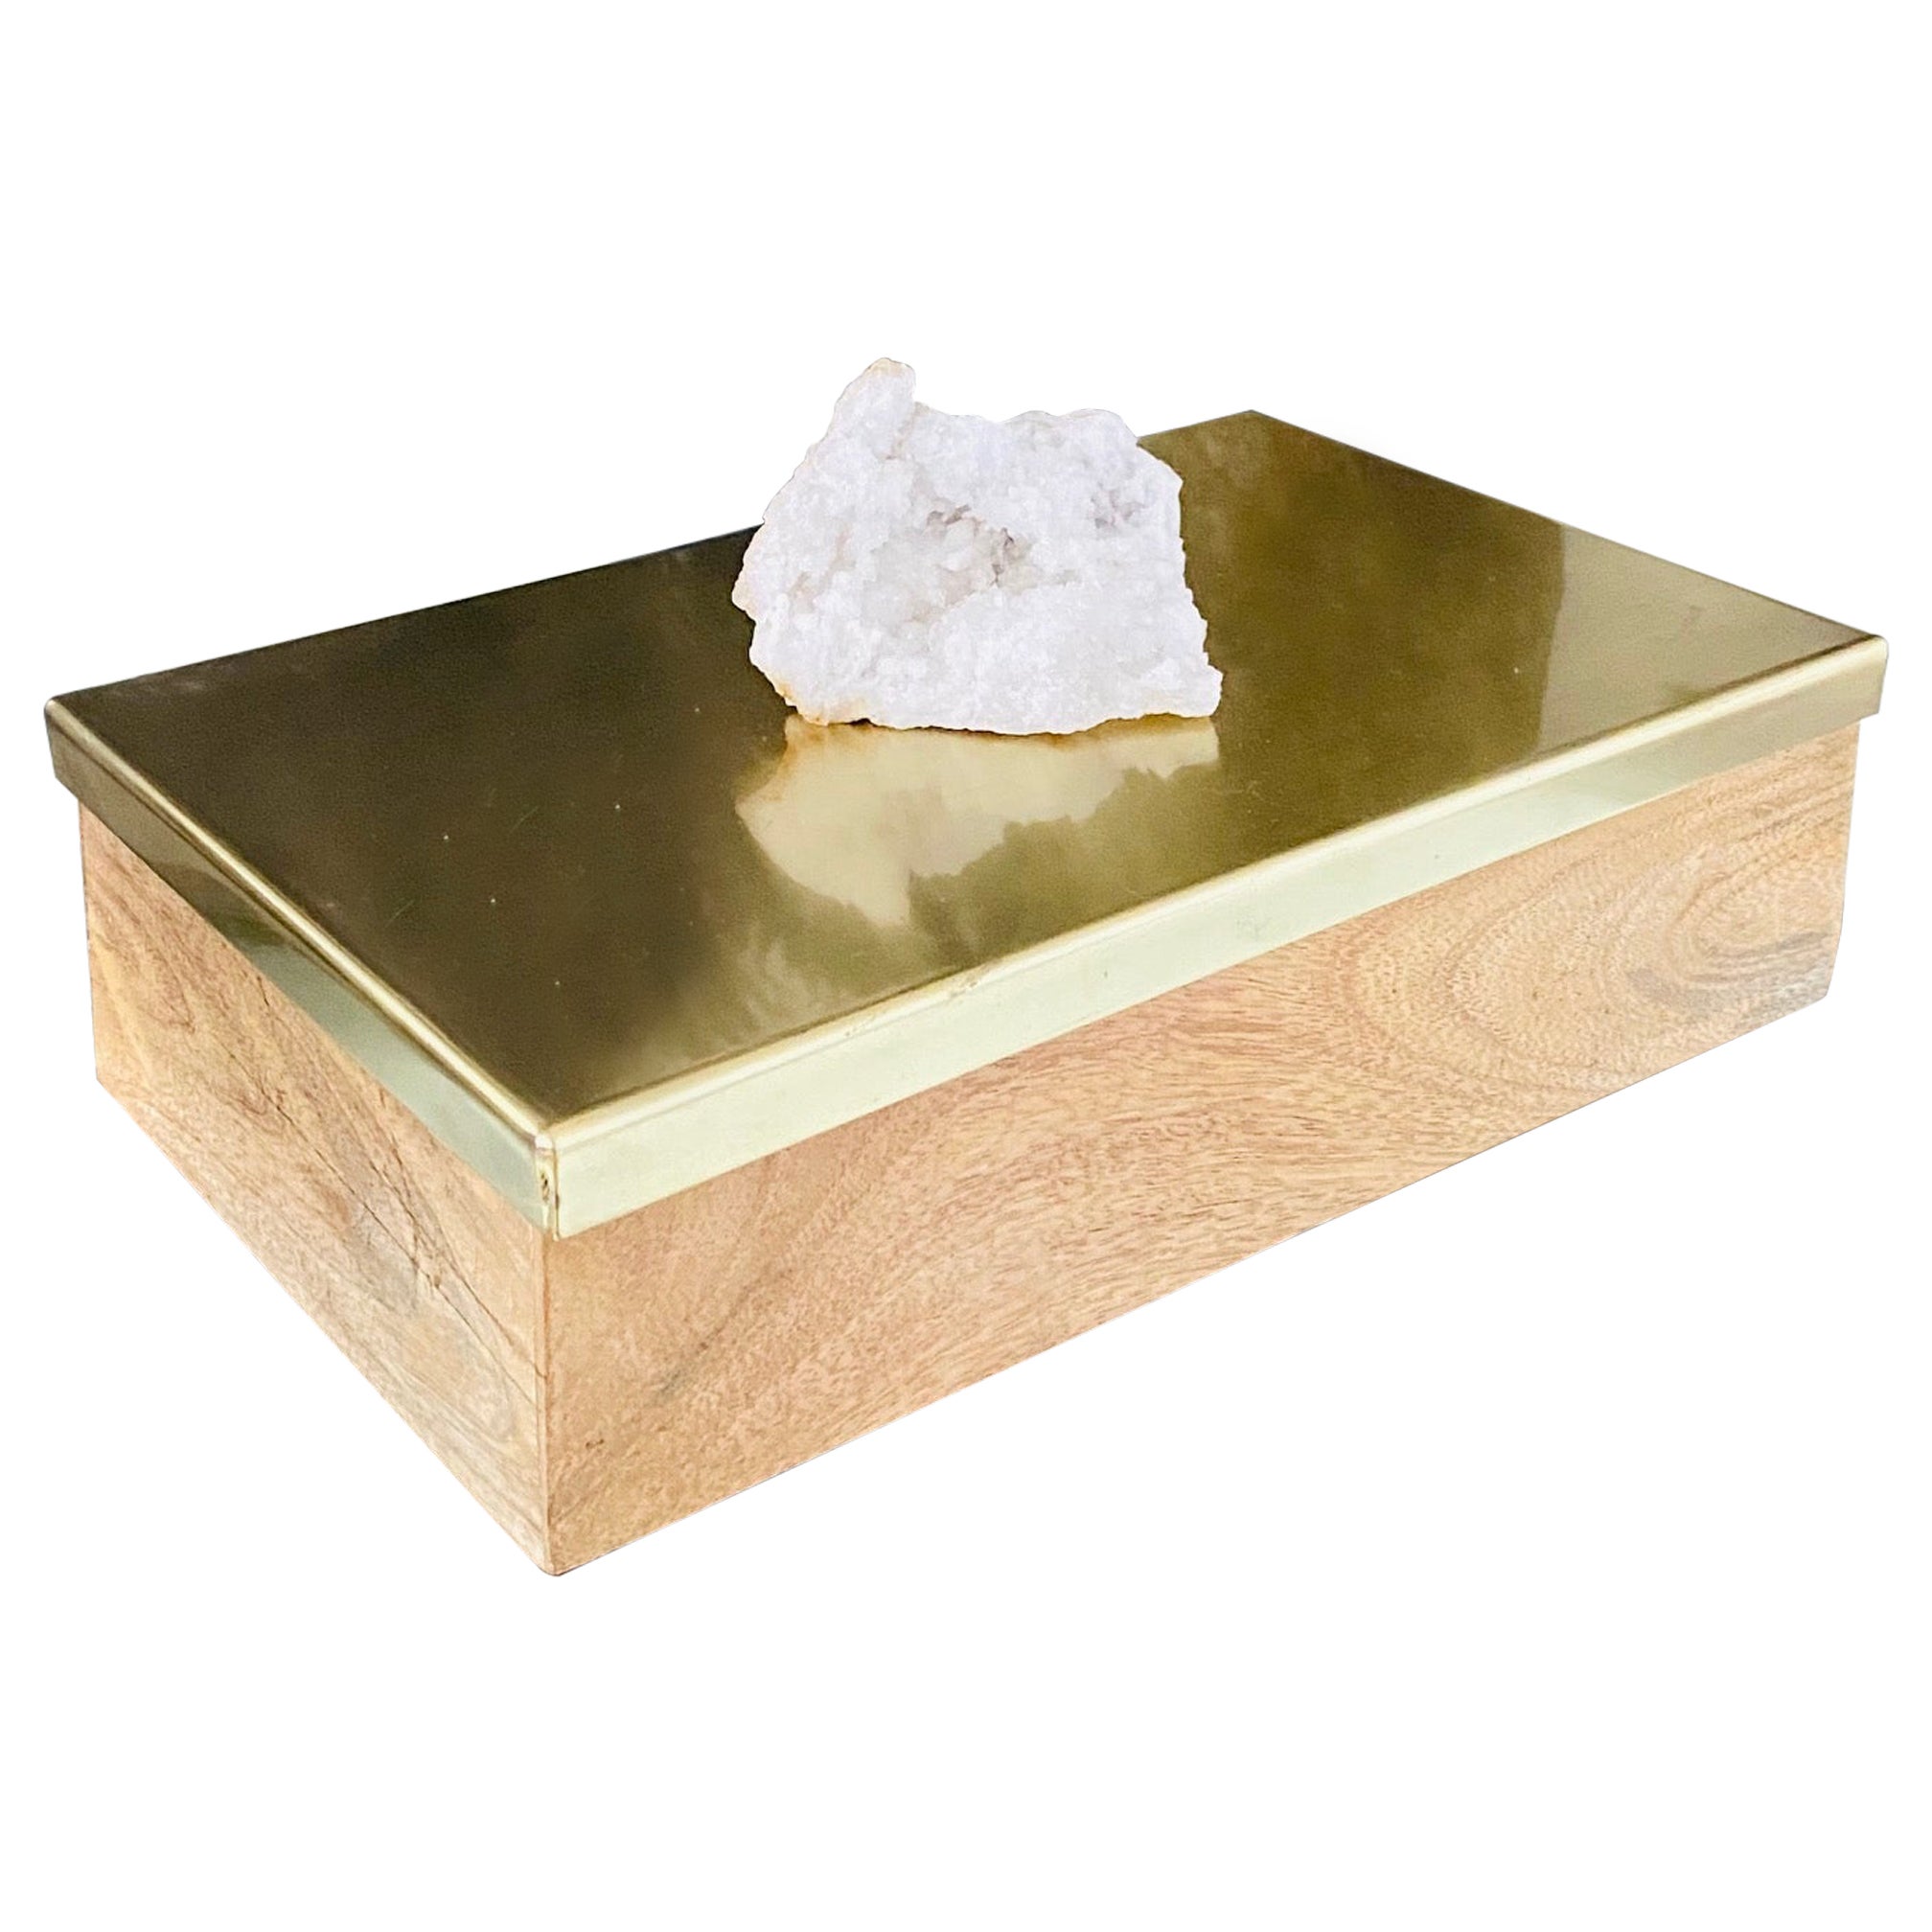 Vintage Brass and Wood Decorative Box with Large Quartz Crystal Stone, Brazil